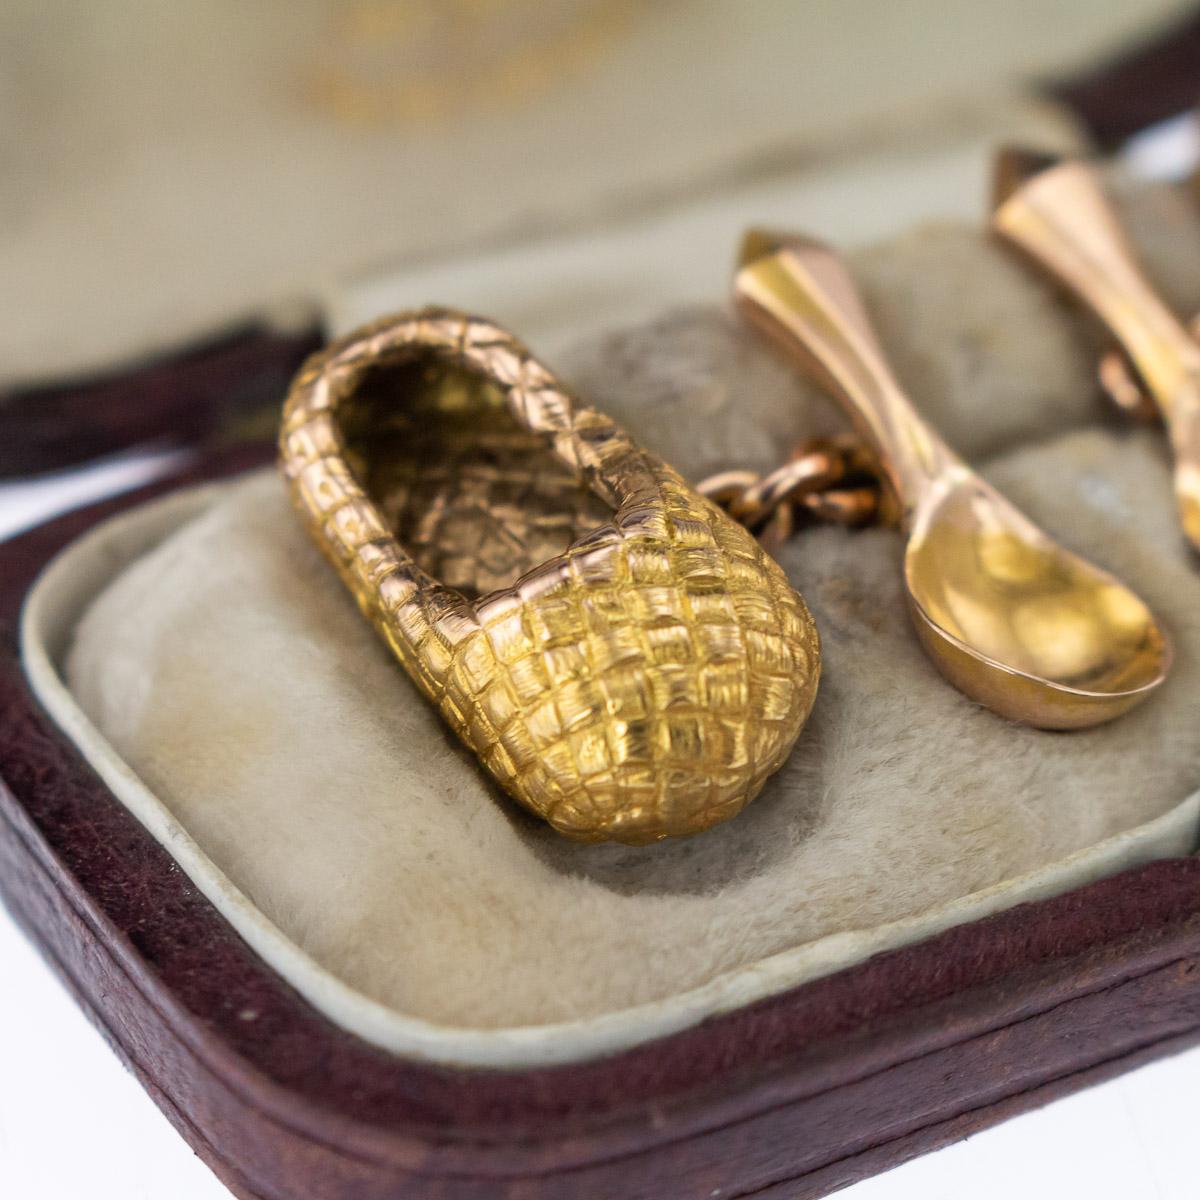 19th Century Russian Faberge 56 Gold Lapti and Spoon Cufflinks V Soloviev 2